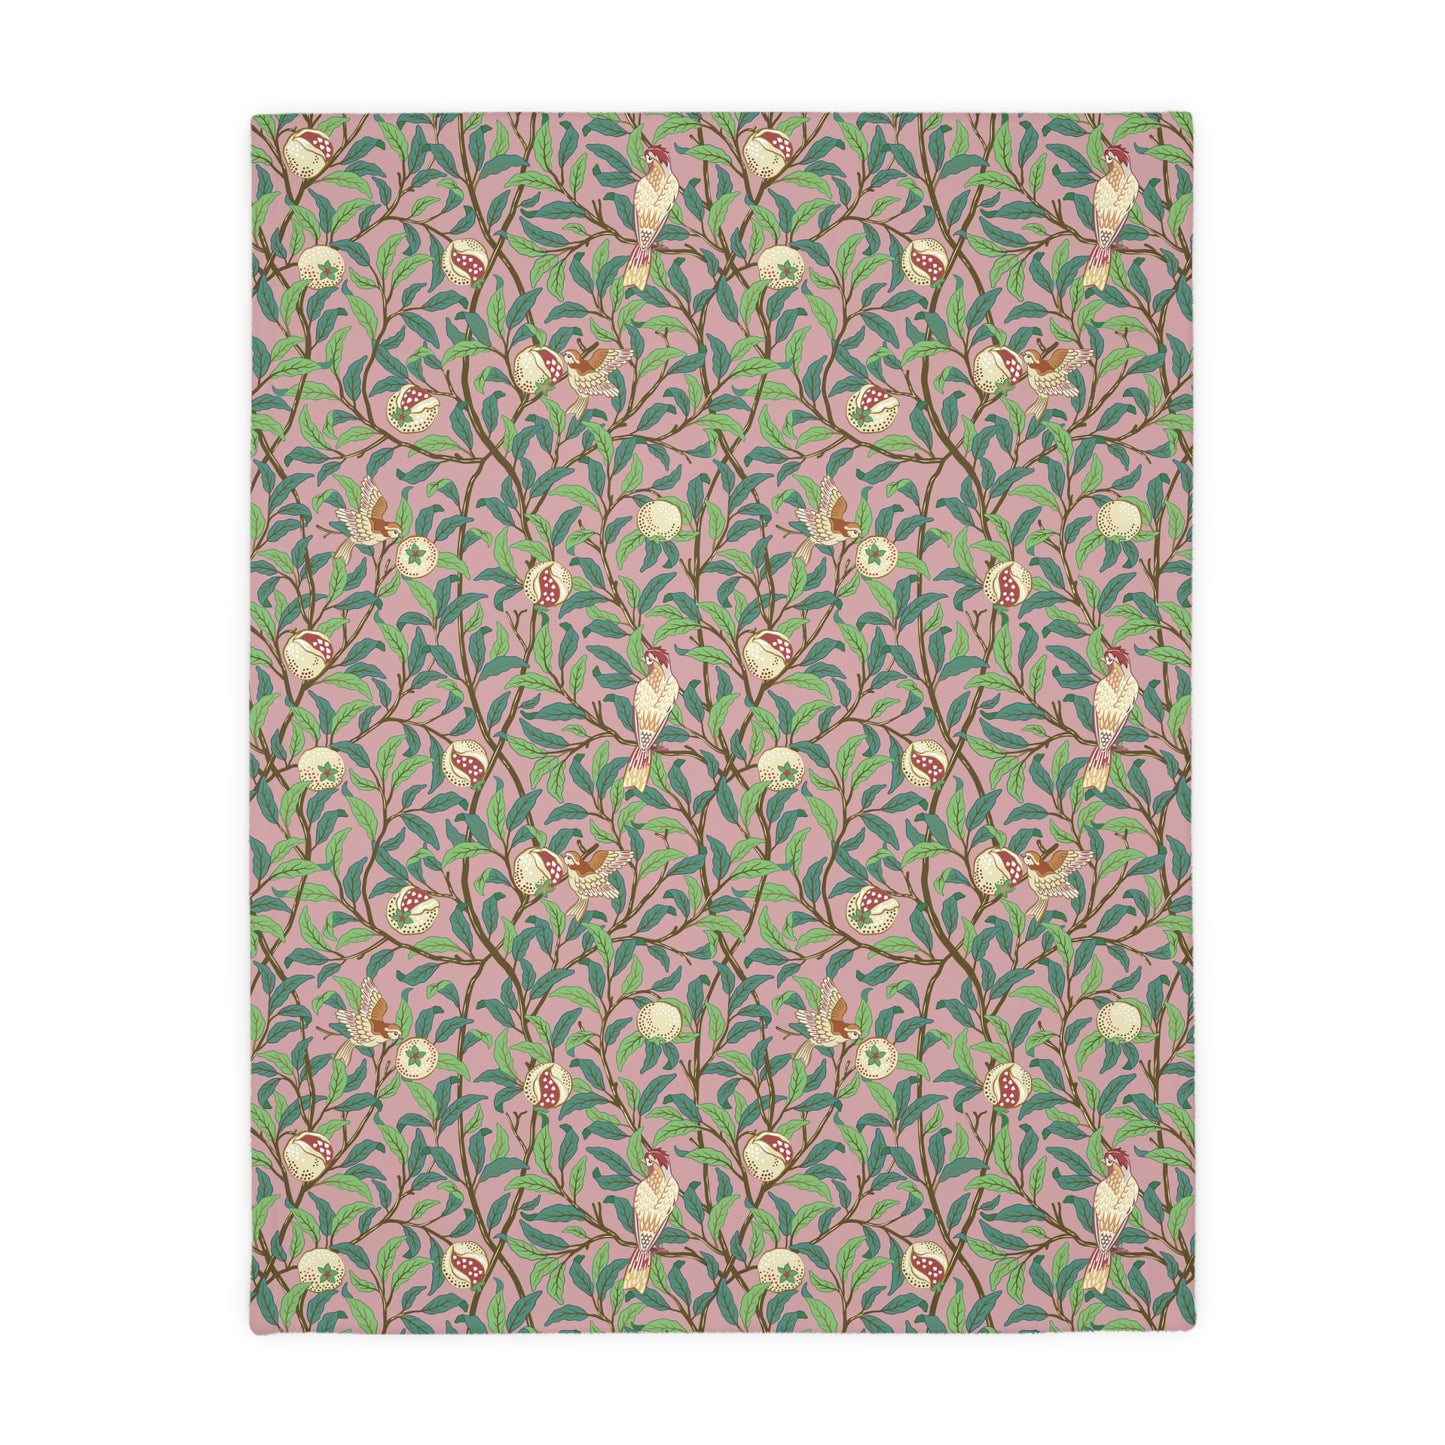 william-morris-co-luxury-velveteen-minky-blanket-two-sided-print-bird-and-pomegranate-collection-rosella-parchment-6